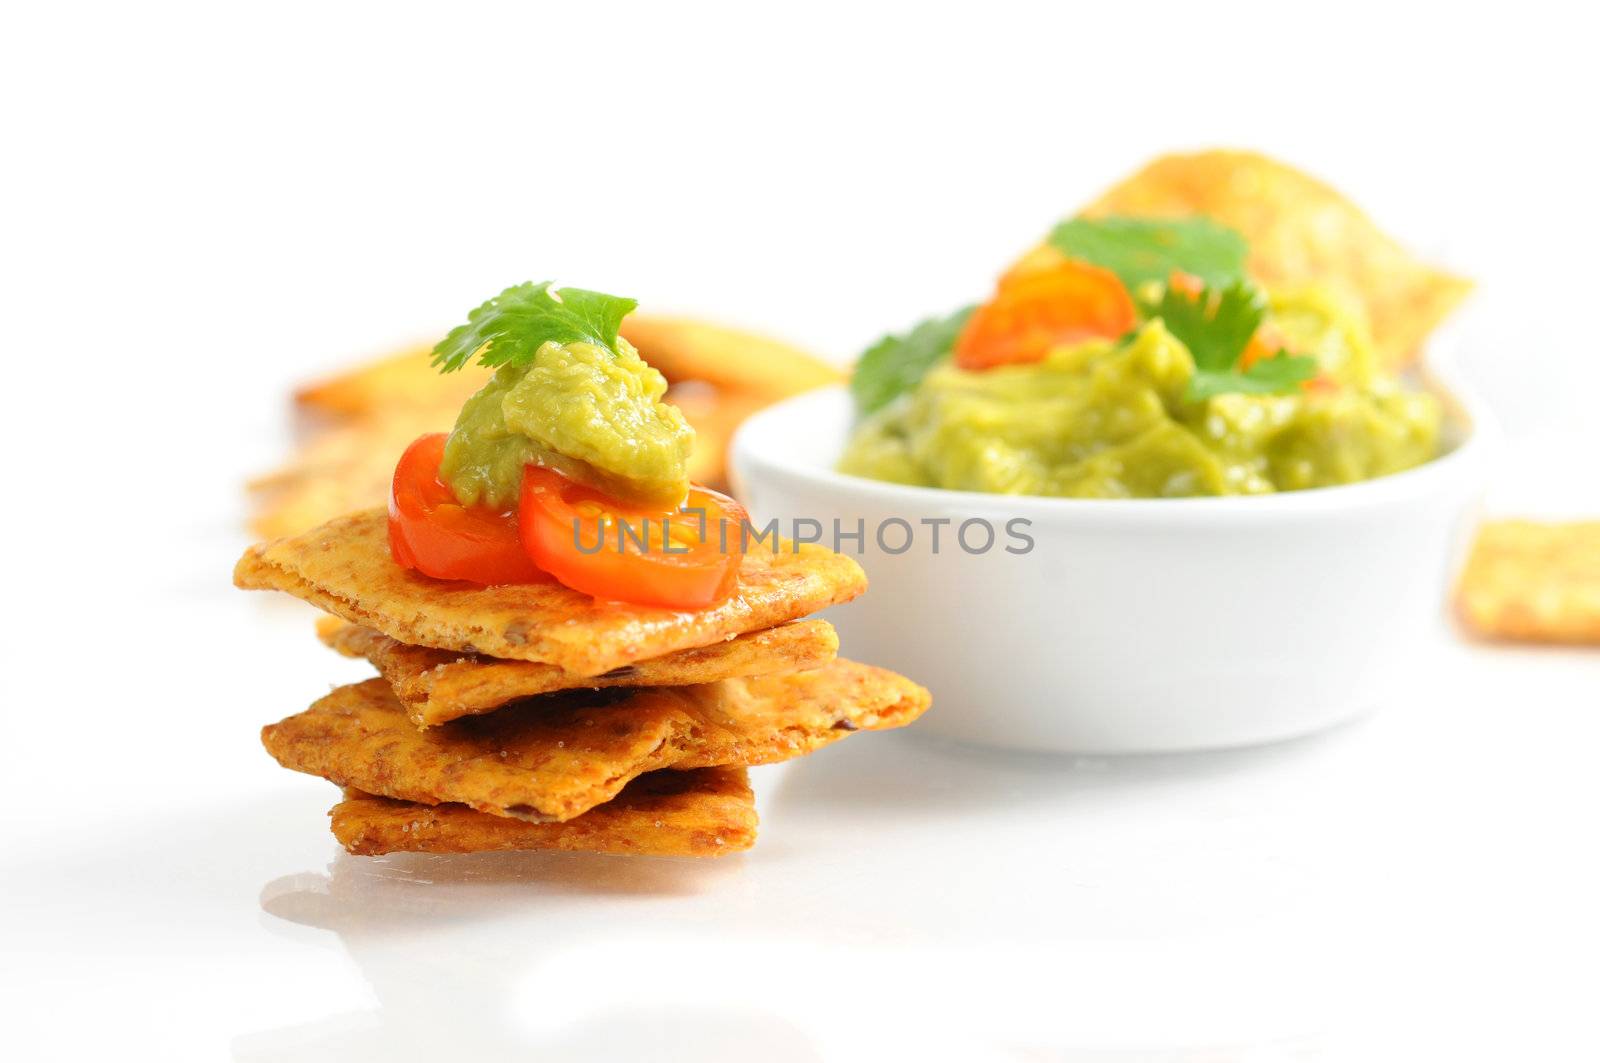 Crackers topped with fresh guacamole and cilantro.